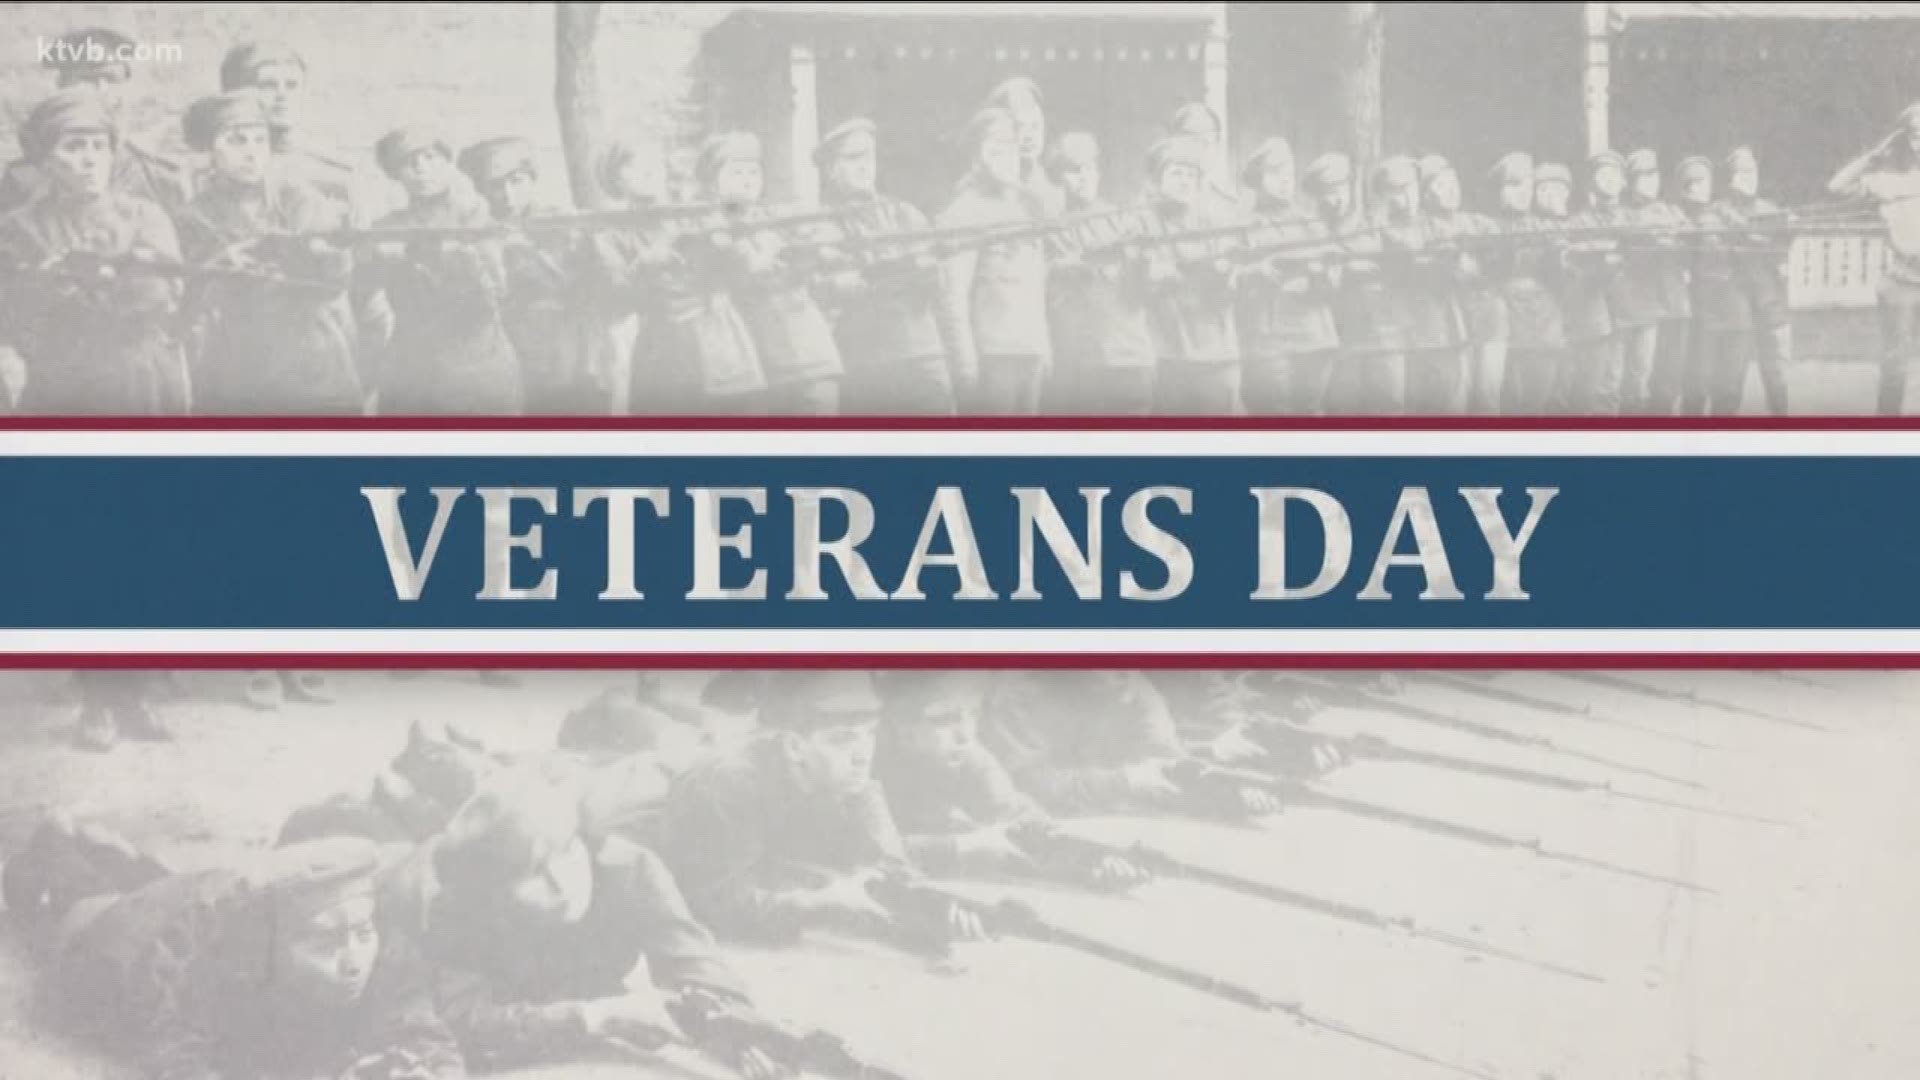 On this Veterans Day, KTVB shares the stories from veterans from 5 different wars, a vet who is in a new fight after leaving the frontlines, and more.